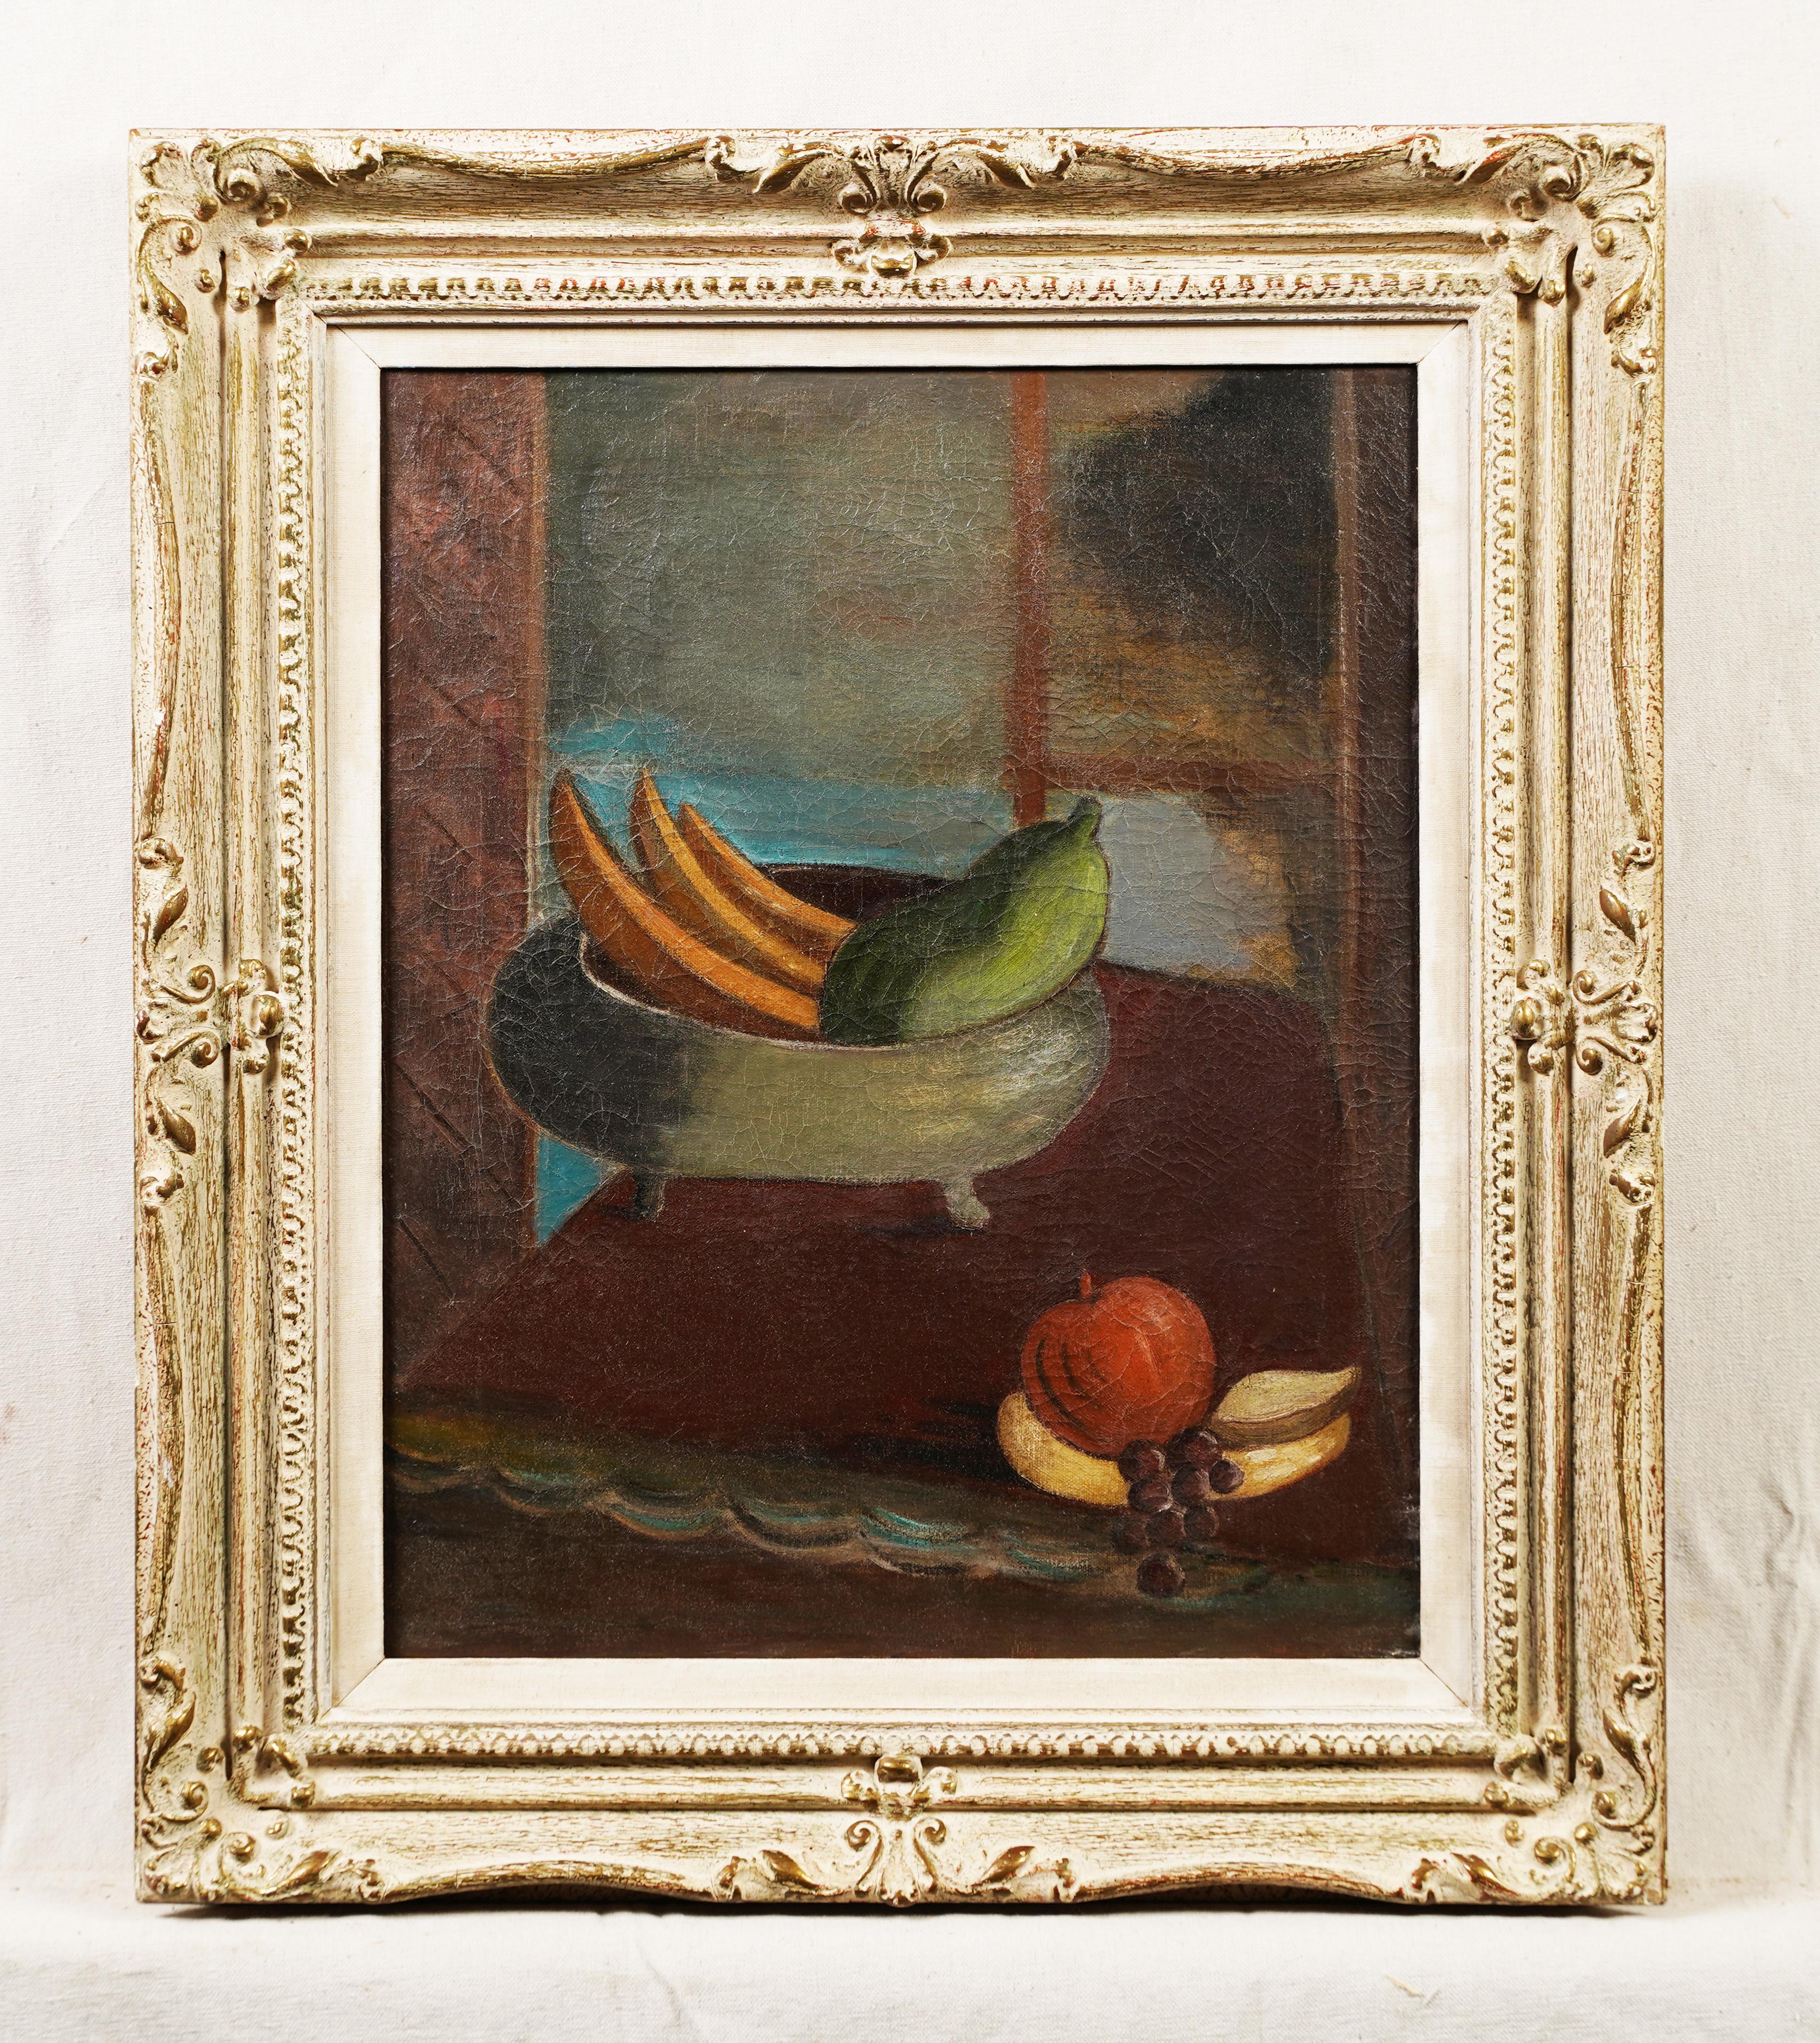 Antique American modernist still life oil painting.  Oil on canvas.  Framed.  Image size, 16L x 20H.